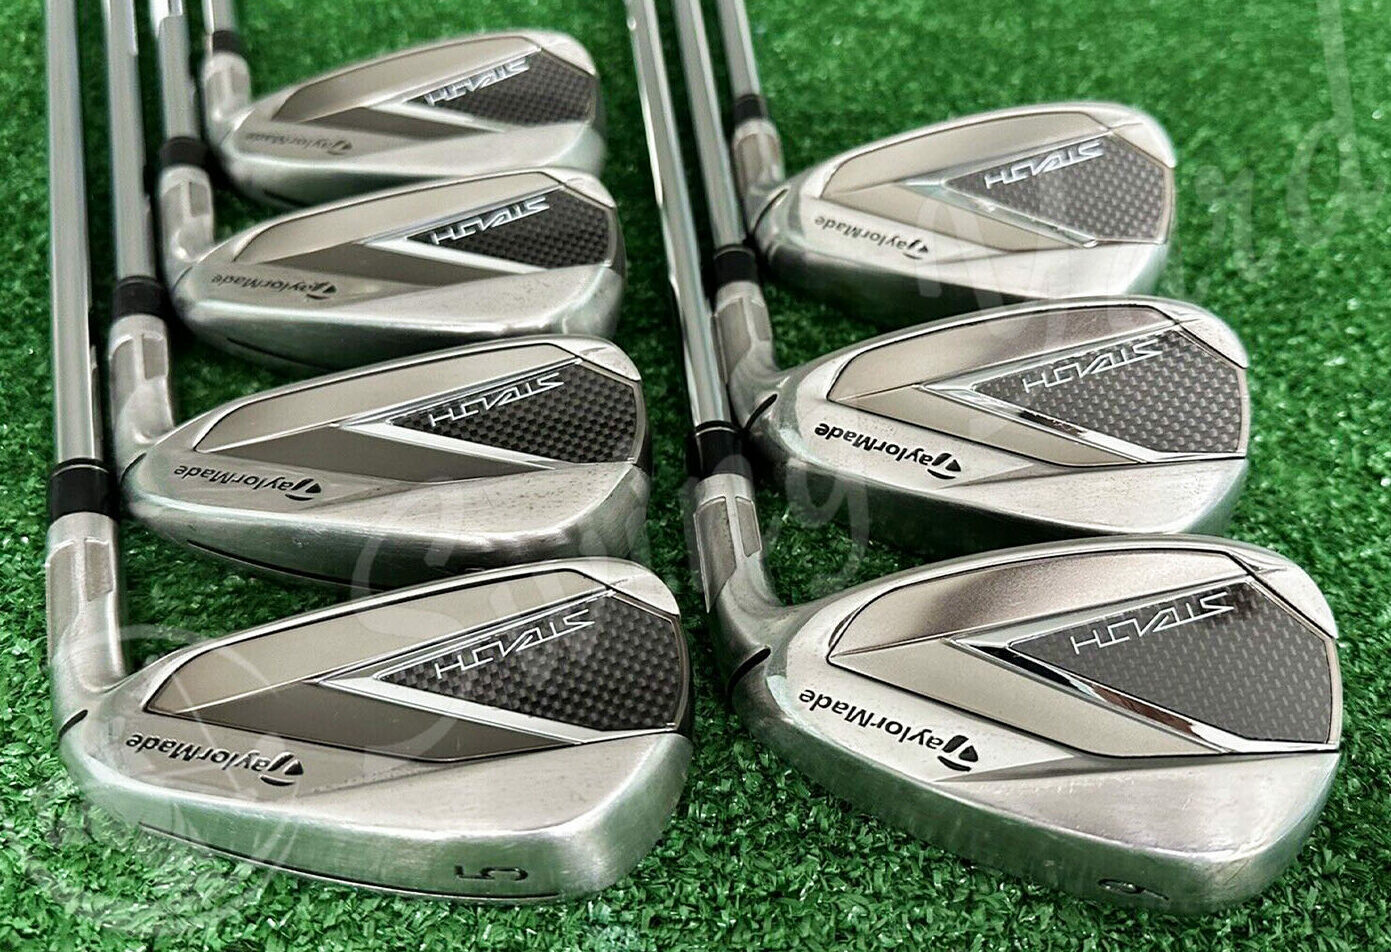 TaylorMade Stealth Women’s Irons at the golf course